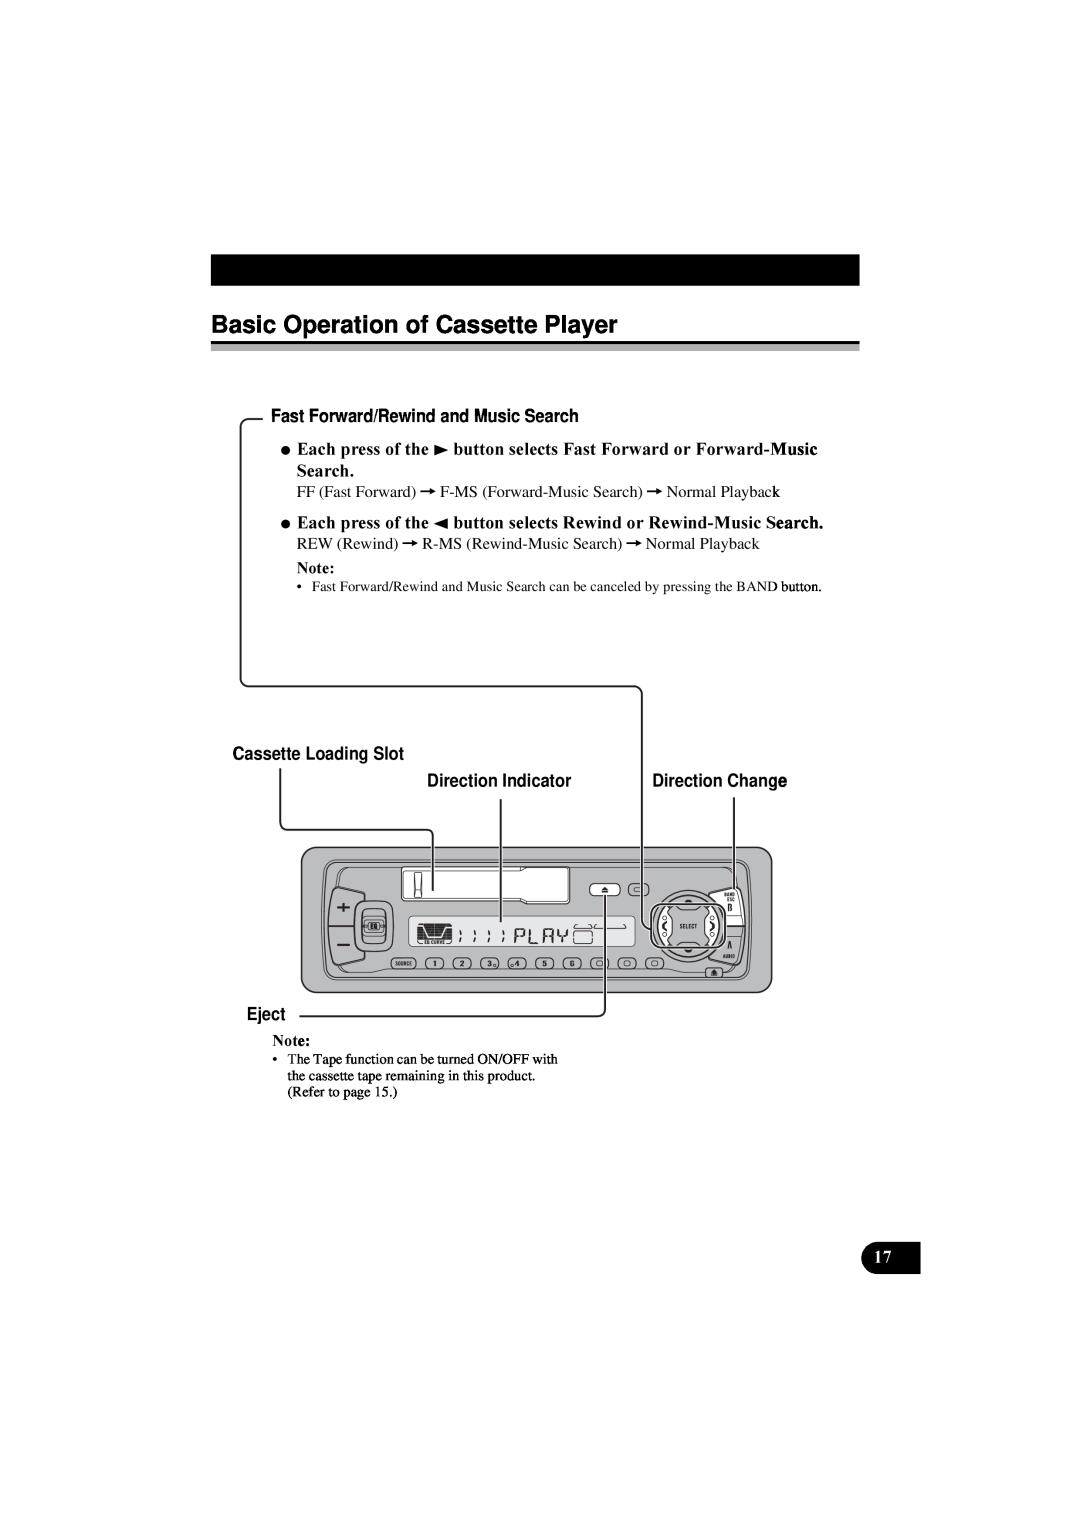 Pioneer KEH-P5900R Basic Operation of Cassette Player, Fast Forward/Rewind and Music Search, Cassette Loading Slot, Eject 